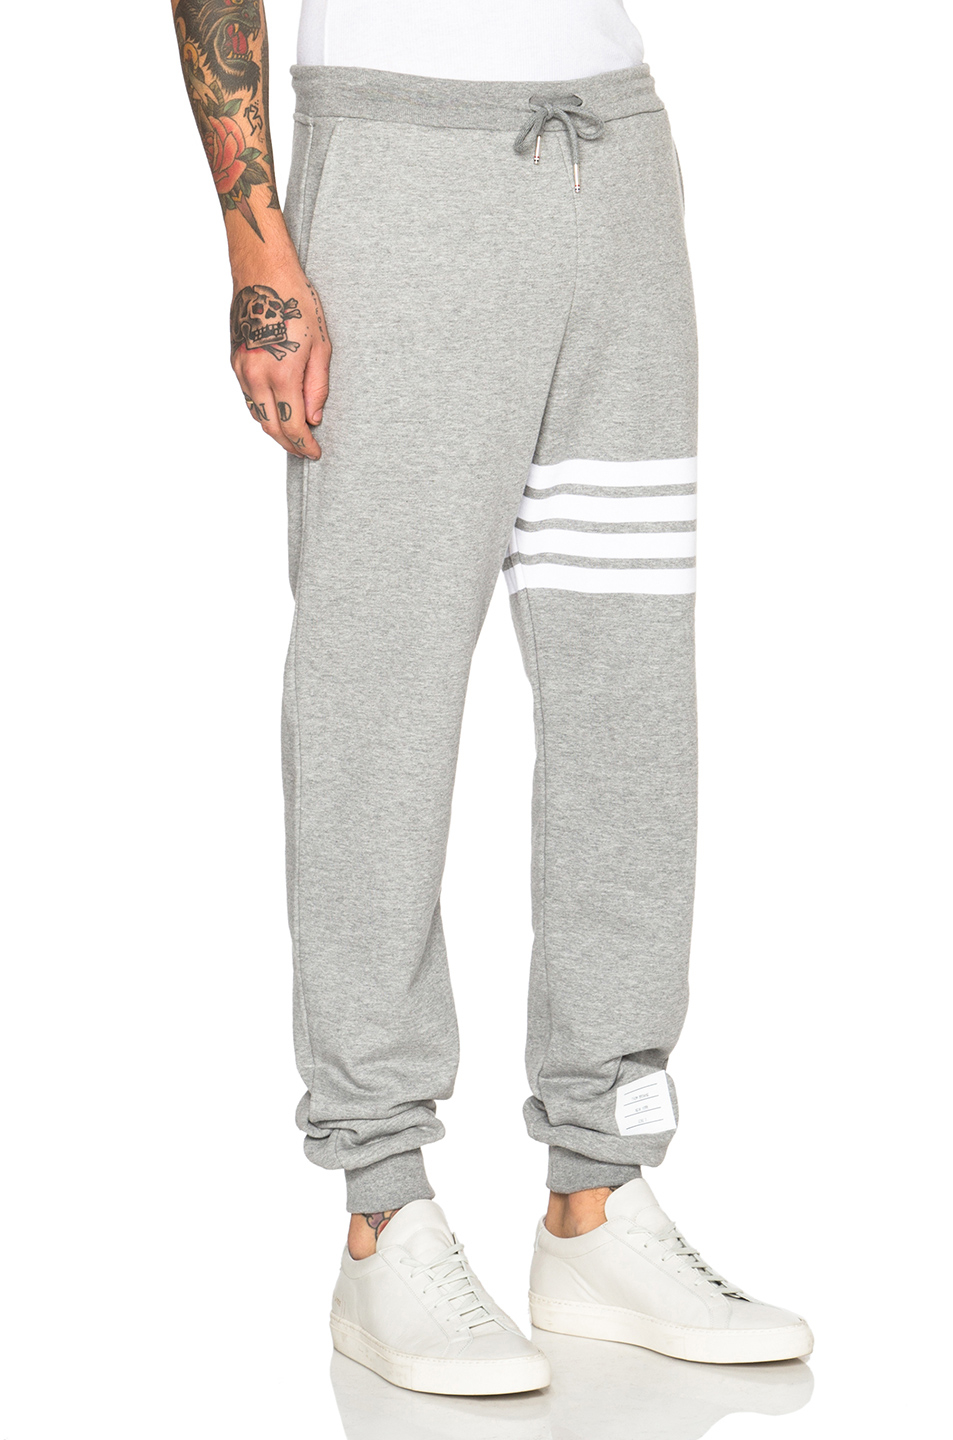 Thom browne Cotton Sweatpants in Gray for Men | Lyst